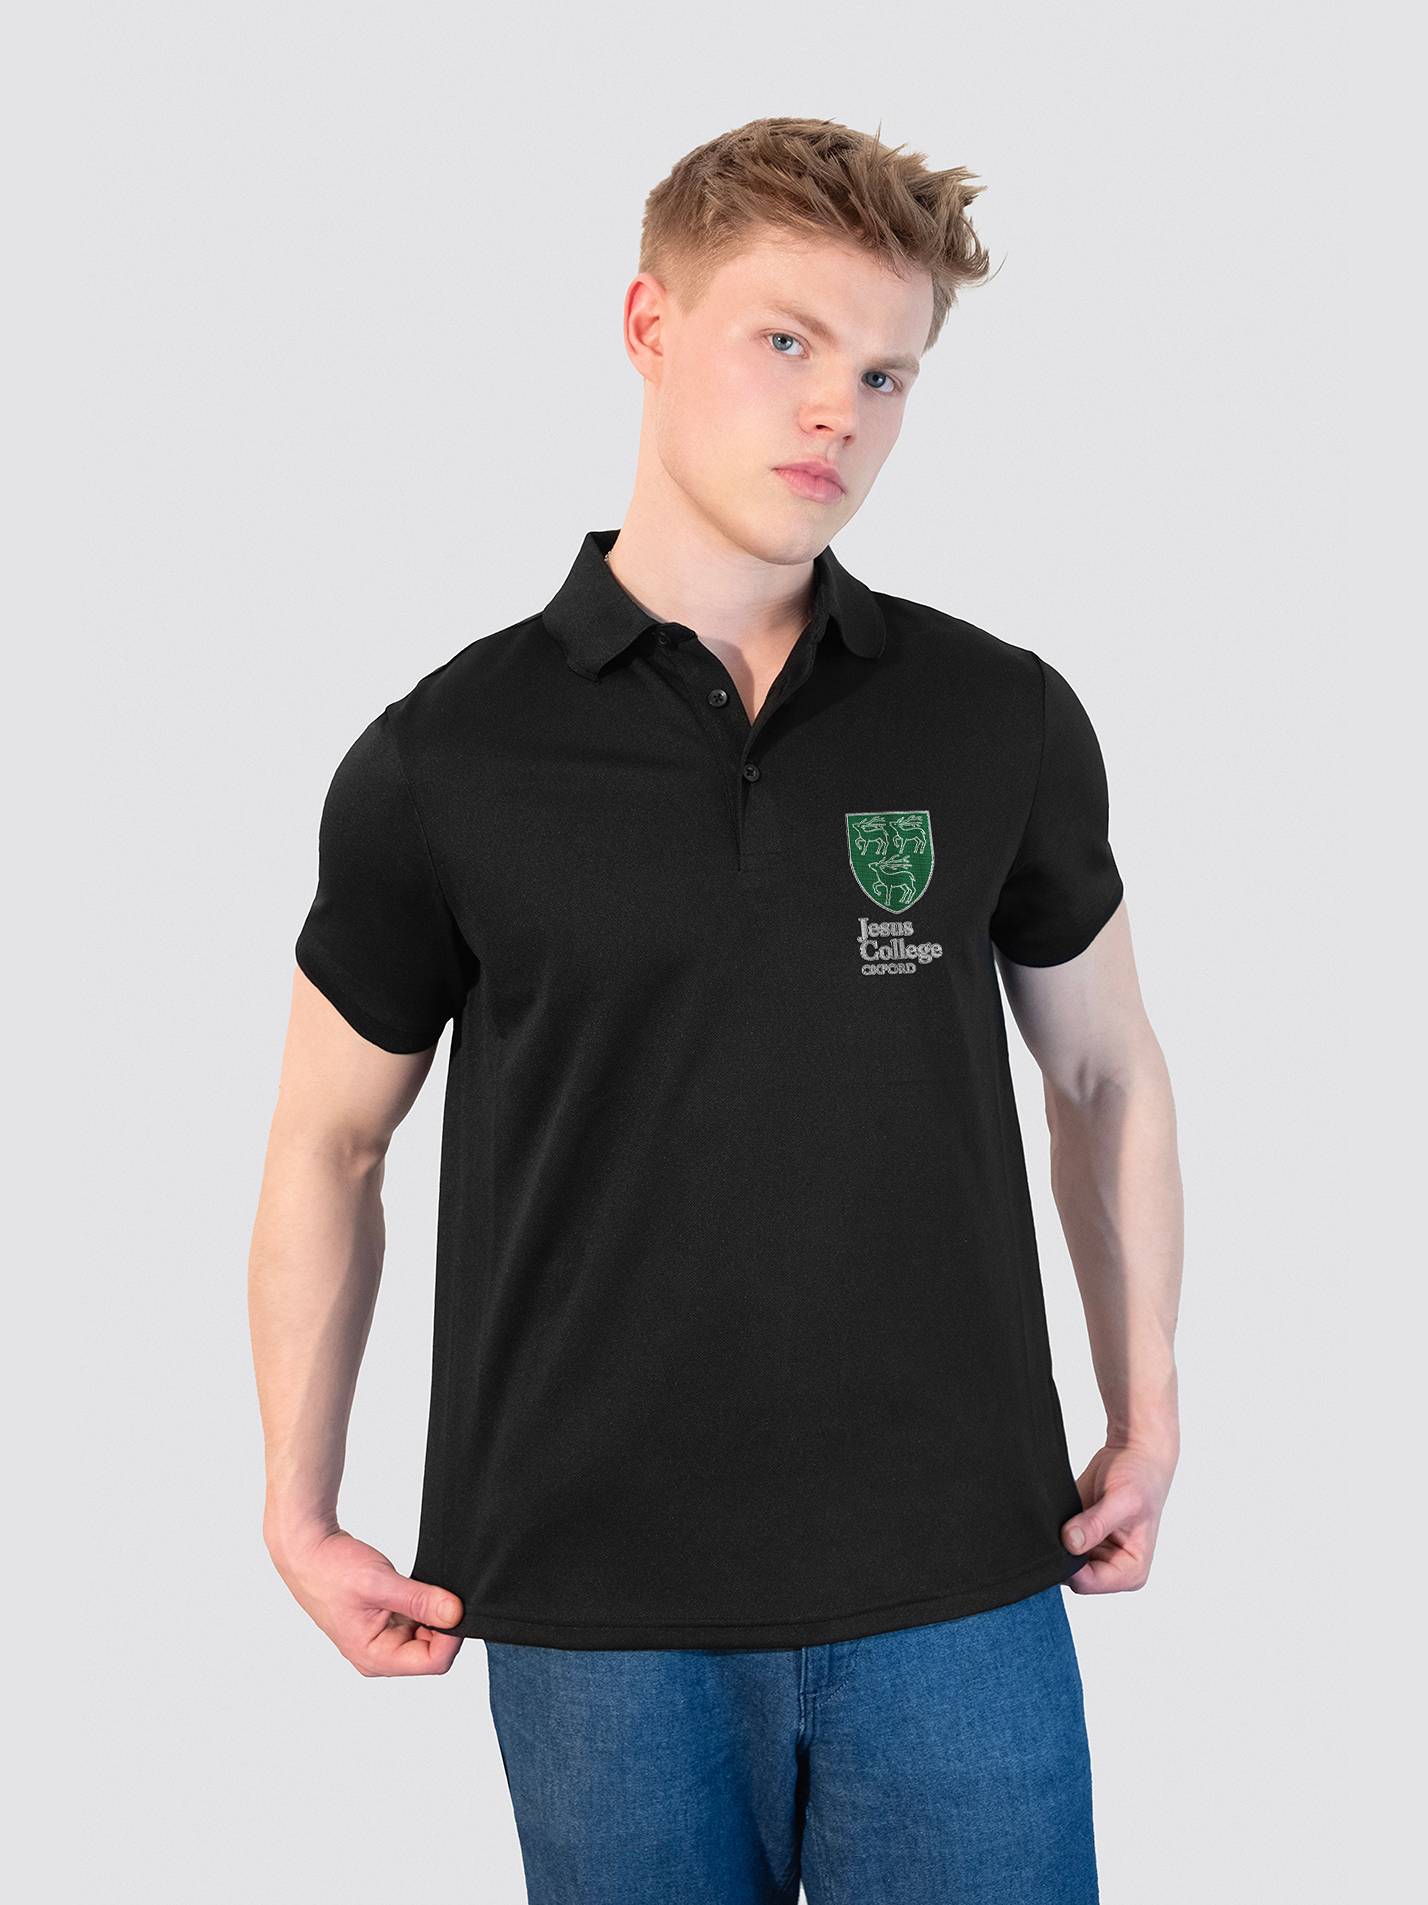 Jesus College Oxford Sustainable Men's Polo Shirt